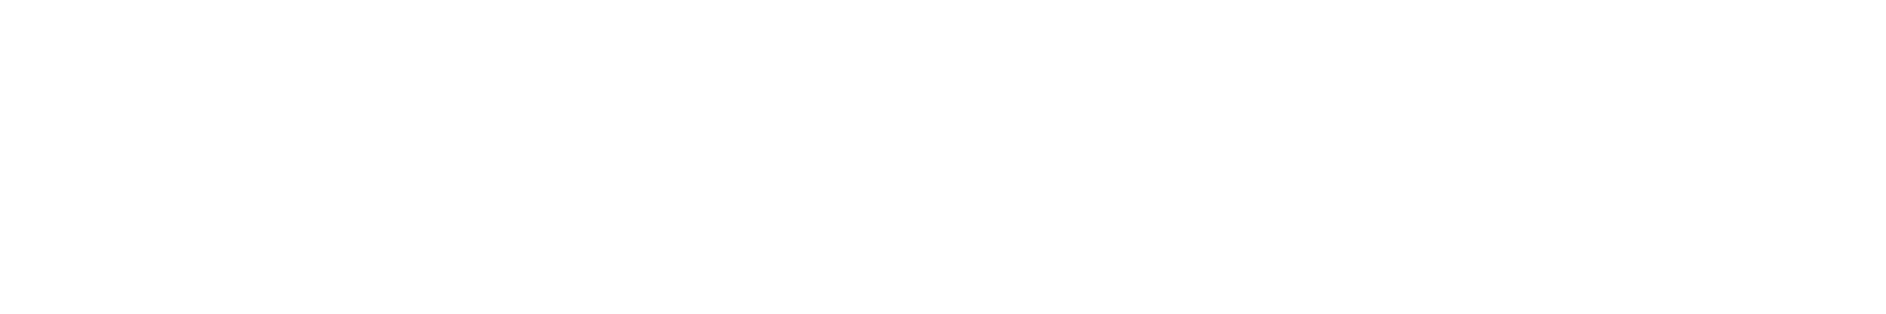 Final Battle 《Buster Bros!!! VS Bad Ass Temple VS MAD TRIGGER CREW》